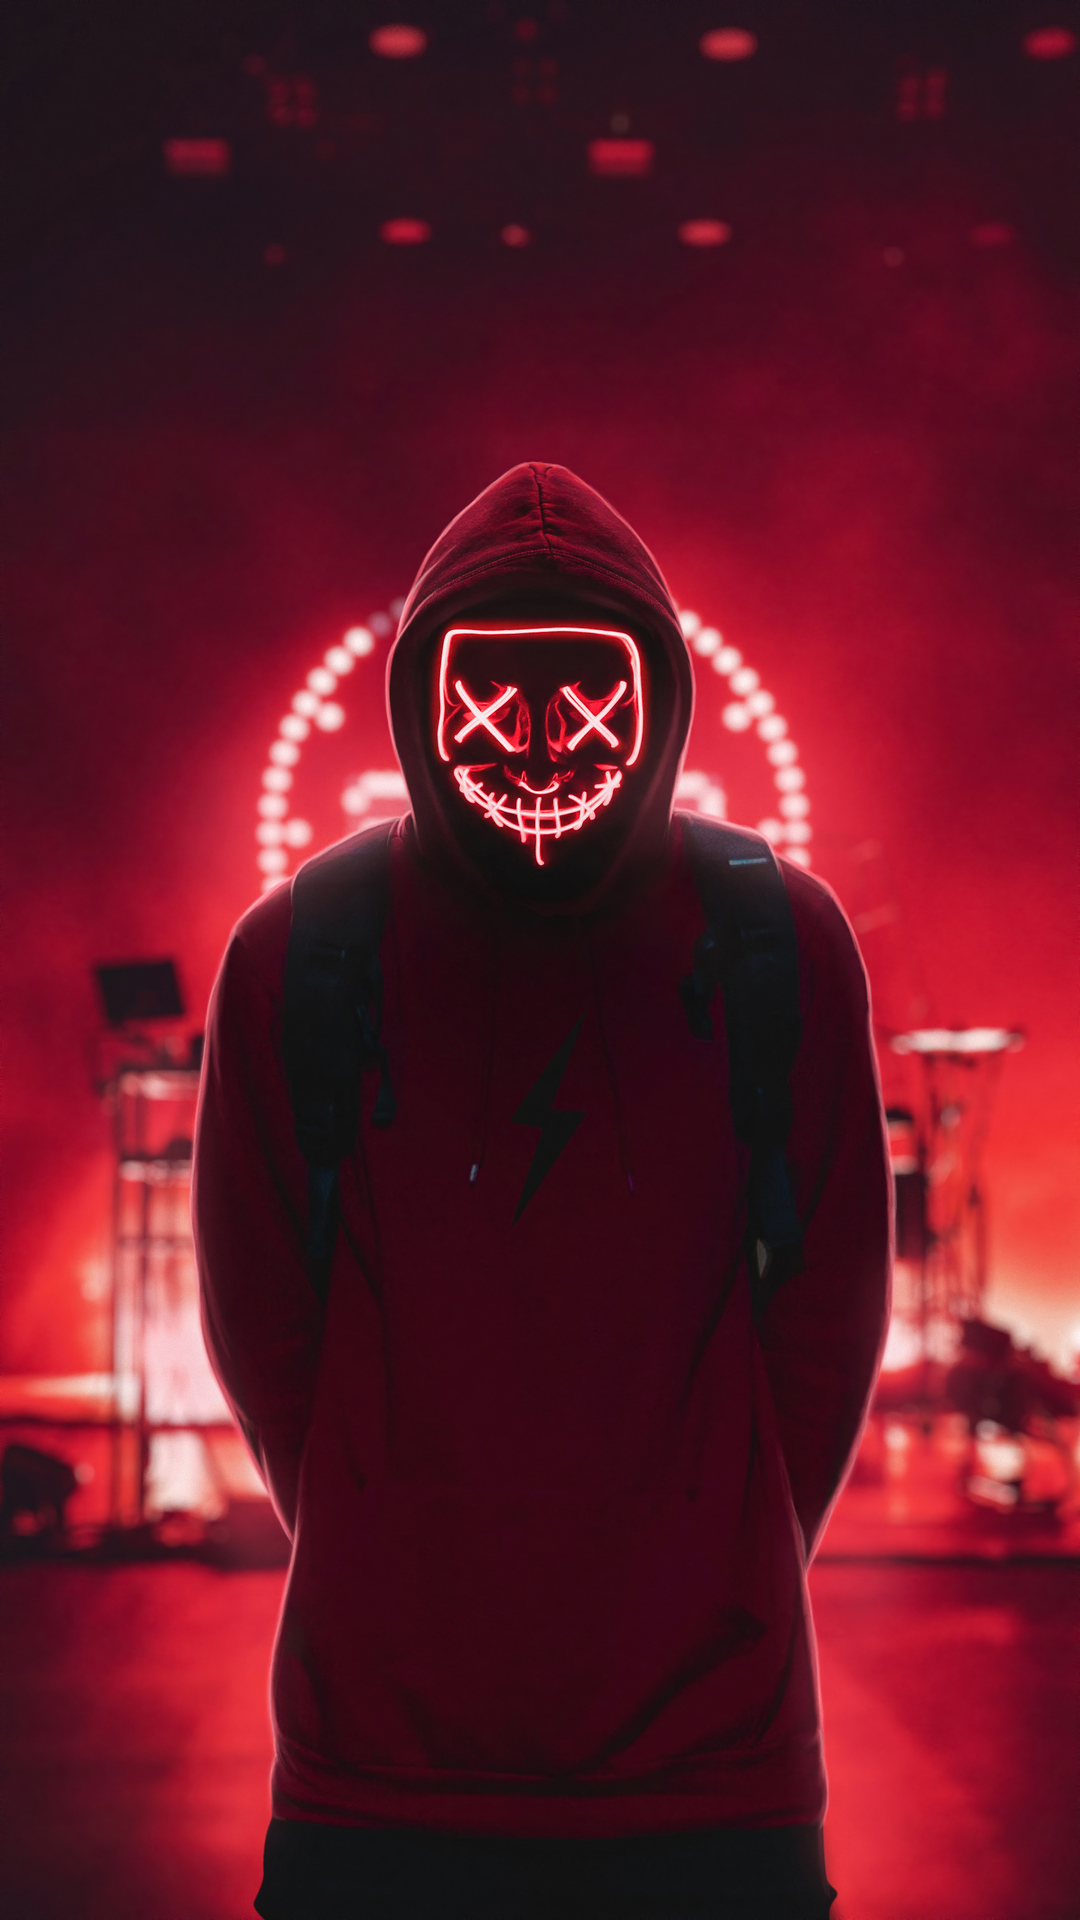 1080x1920 hoodie, anonymus, photography, hd, neon for iPhone 8 wallpaper